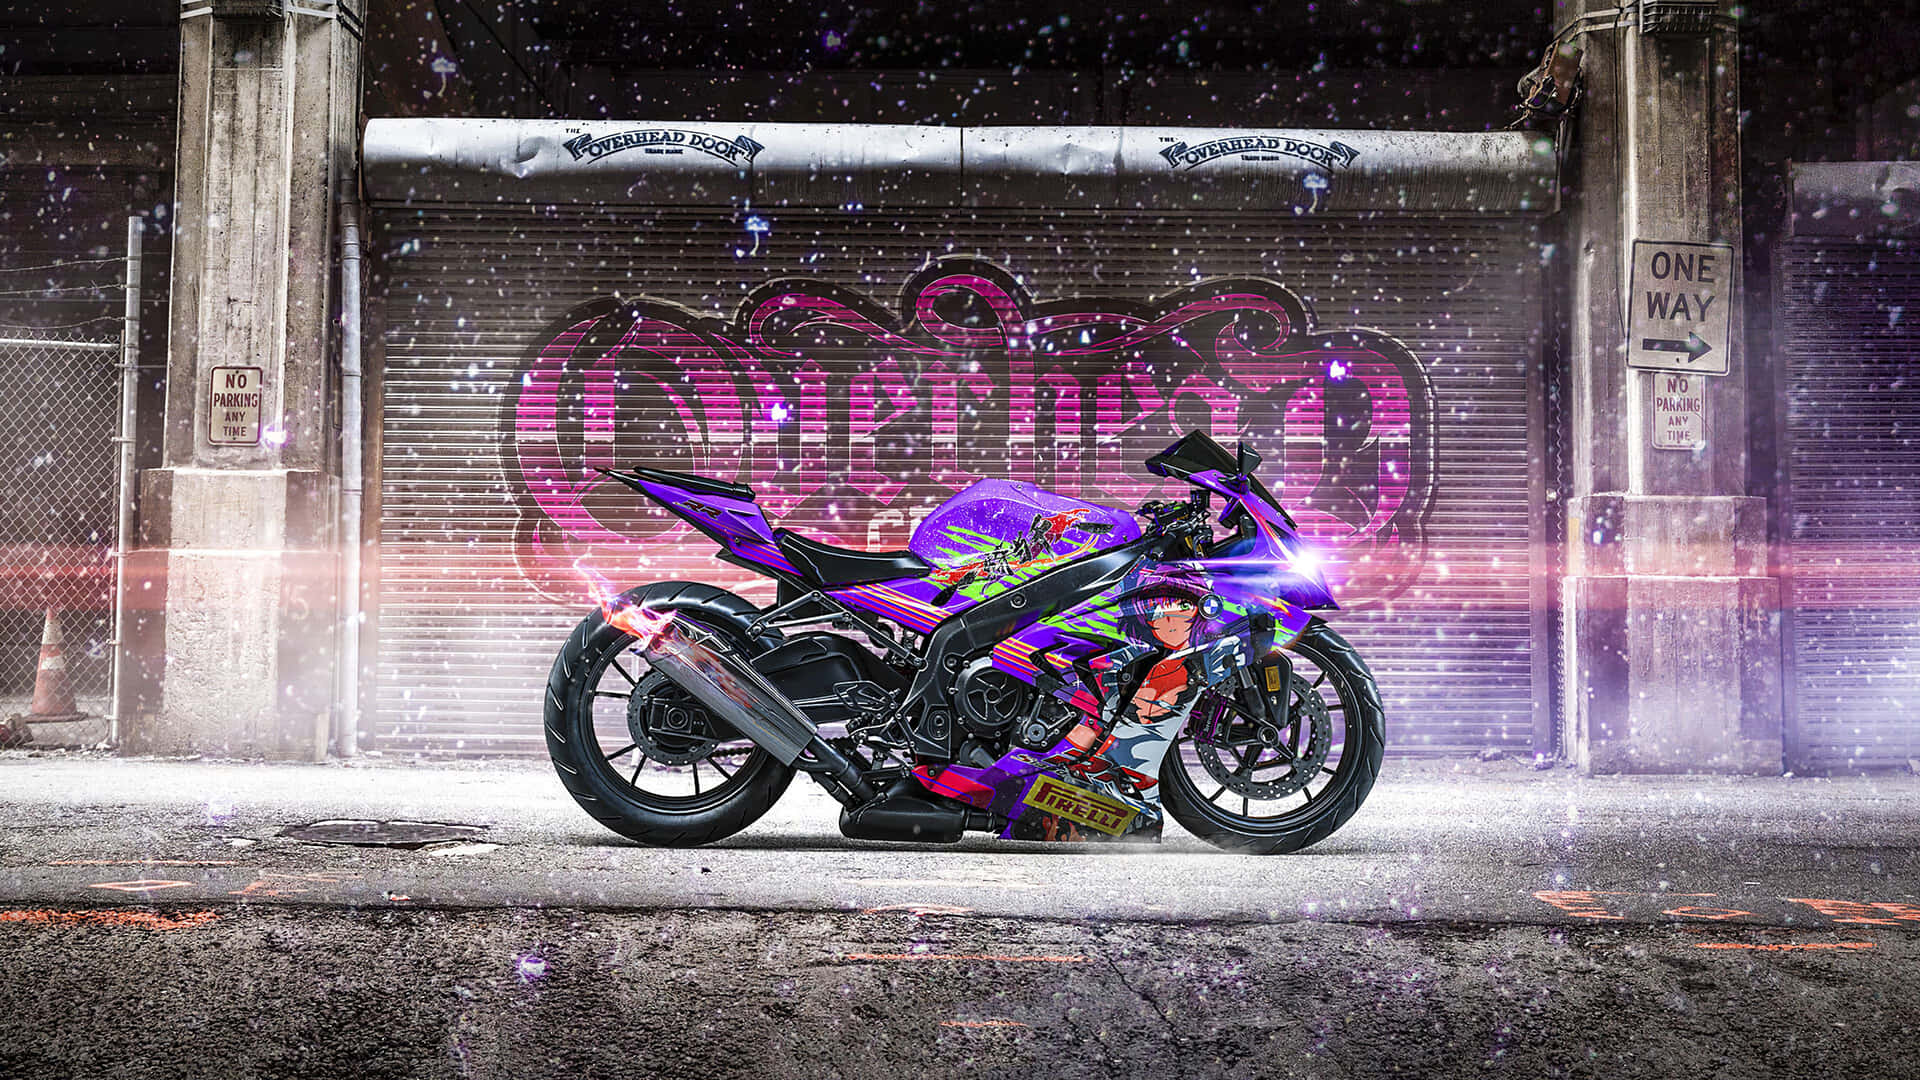 A Motorcycle Parked In The Snow